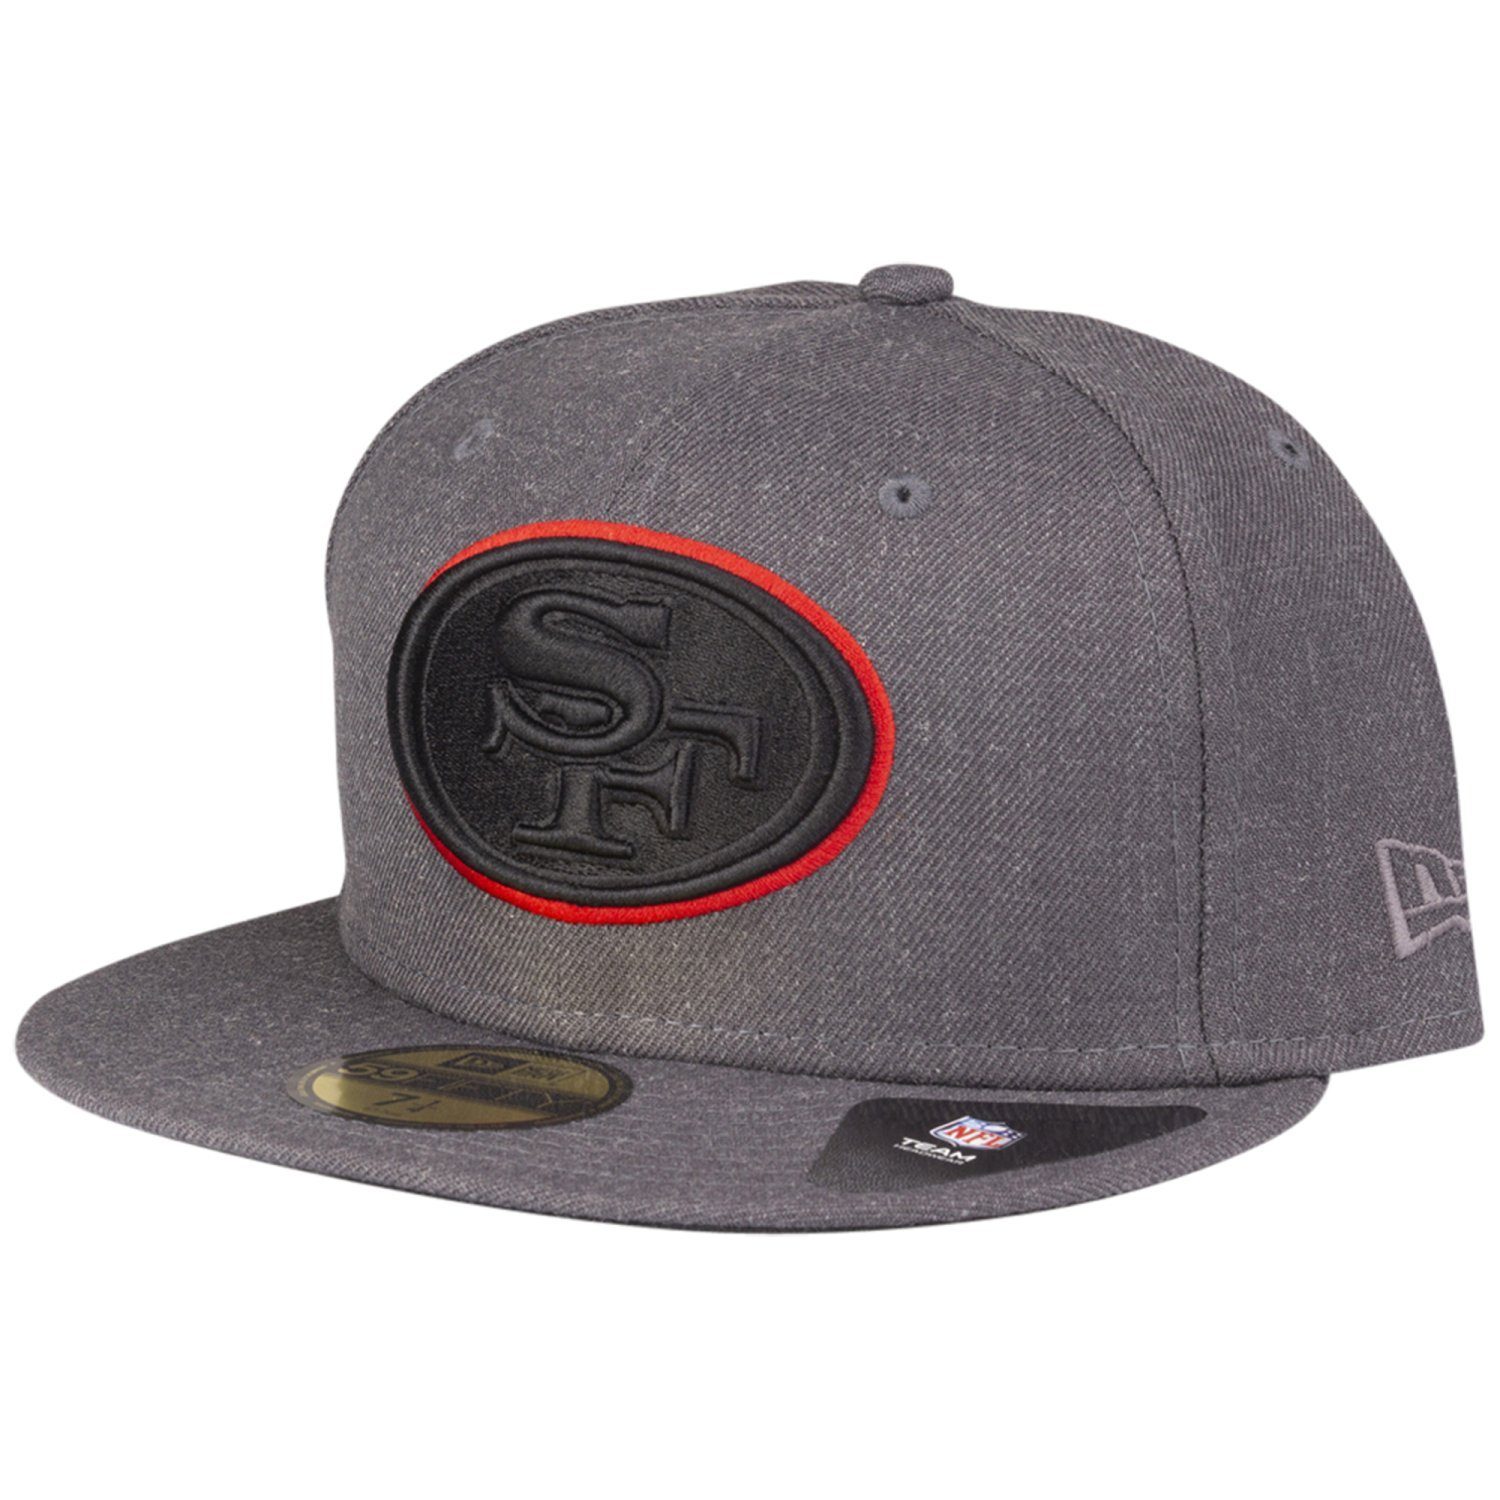 Fitted New San Cap 49ers 59Fifty Era HEATHER Francisco